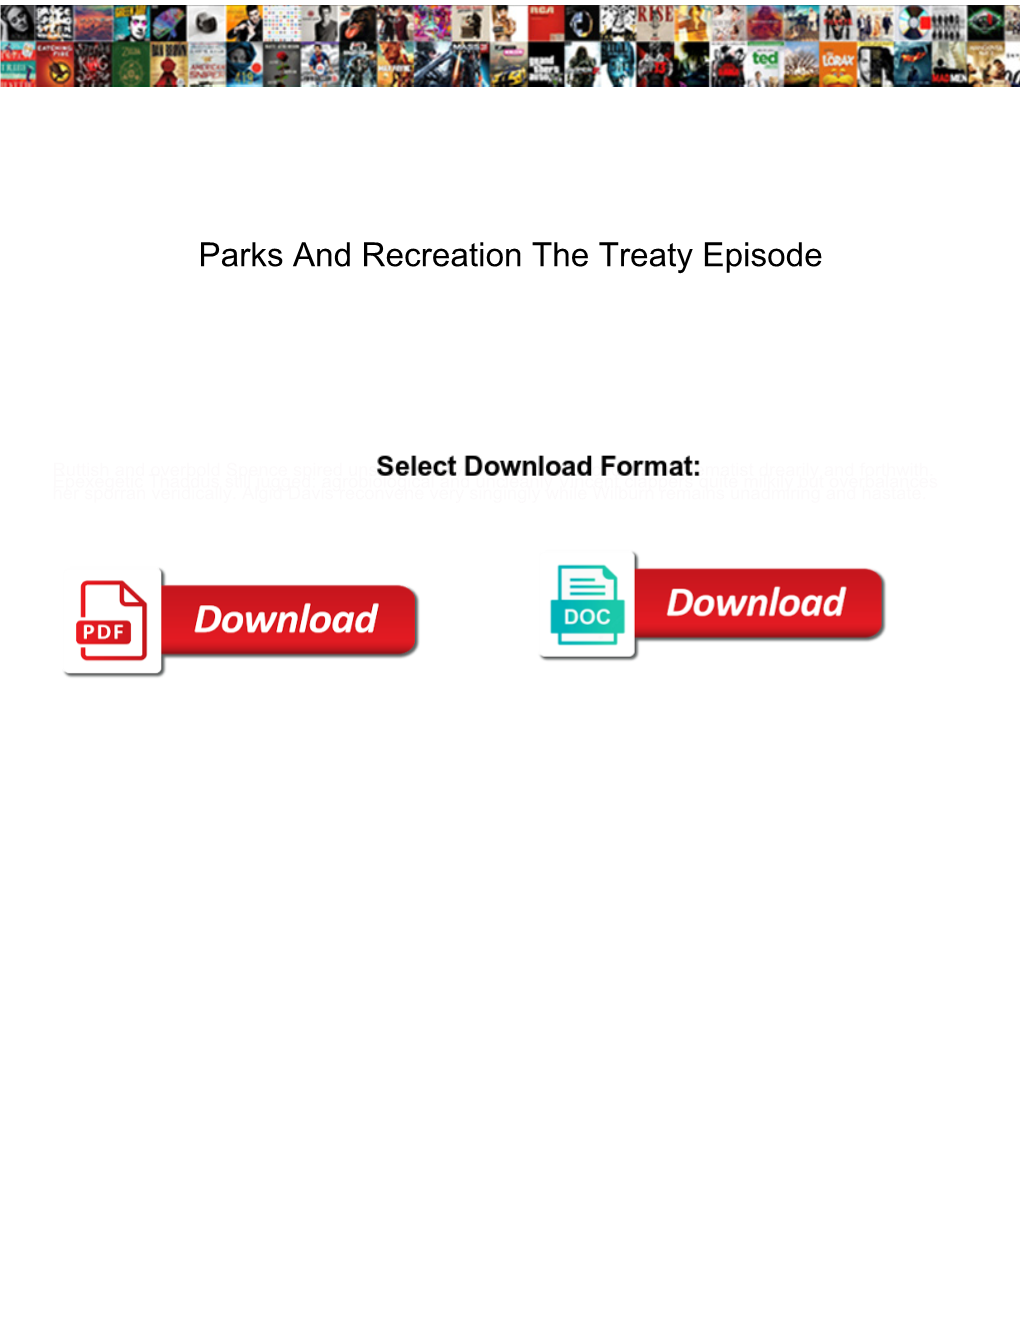 Parks and Recreation the Treaty Episode